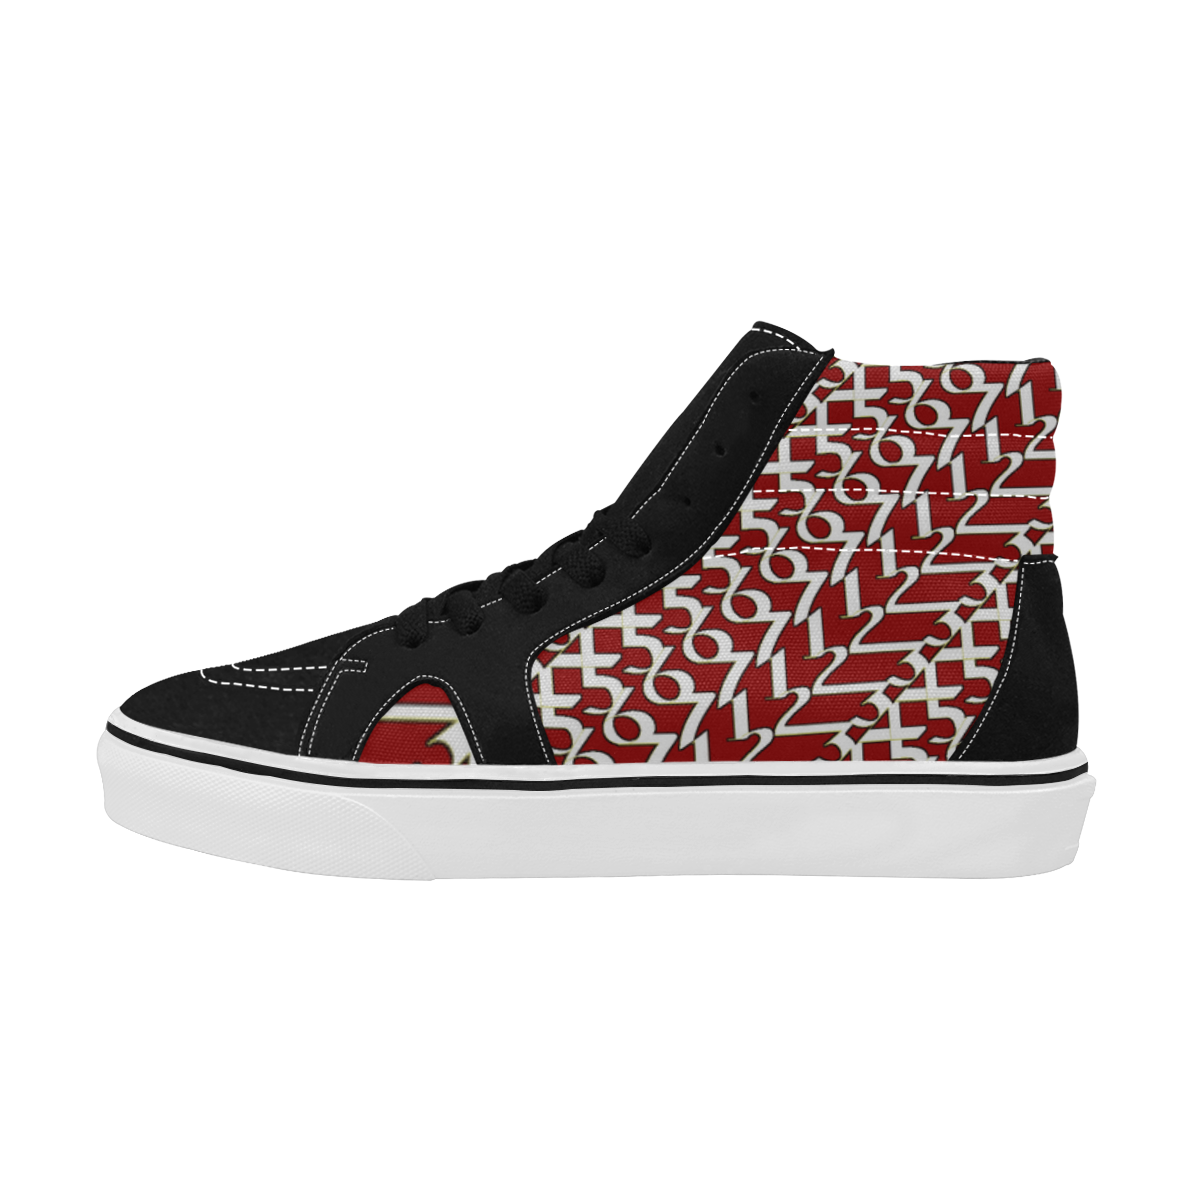 NUMBERS Collection 1234567 Red/White/Black Men's High Top Skateboarding Shoes (Model E001-1)